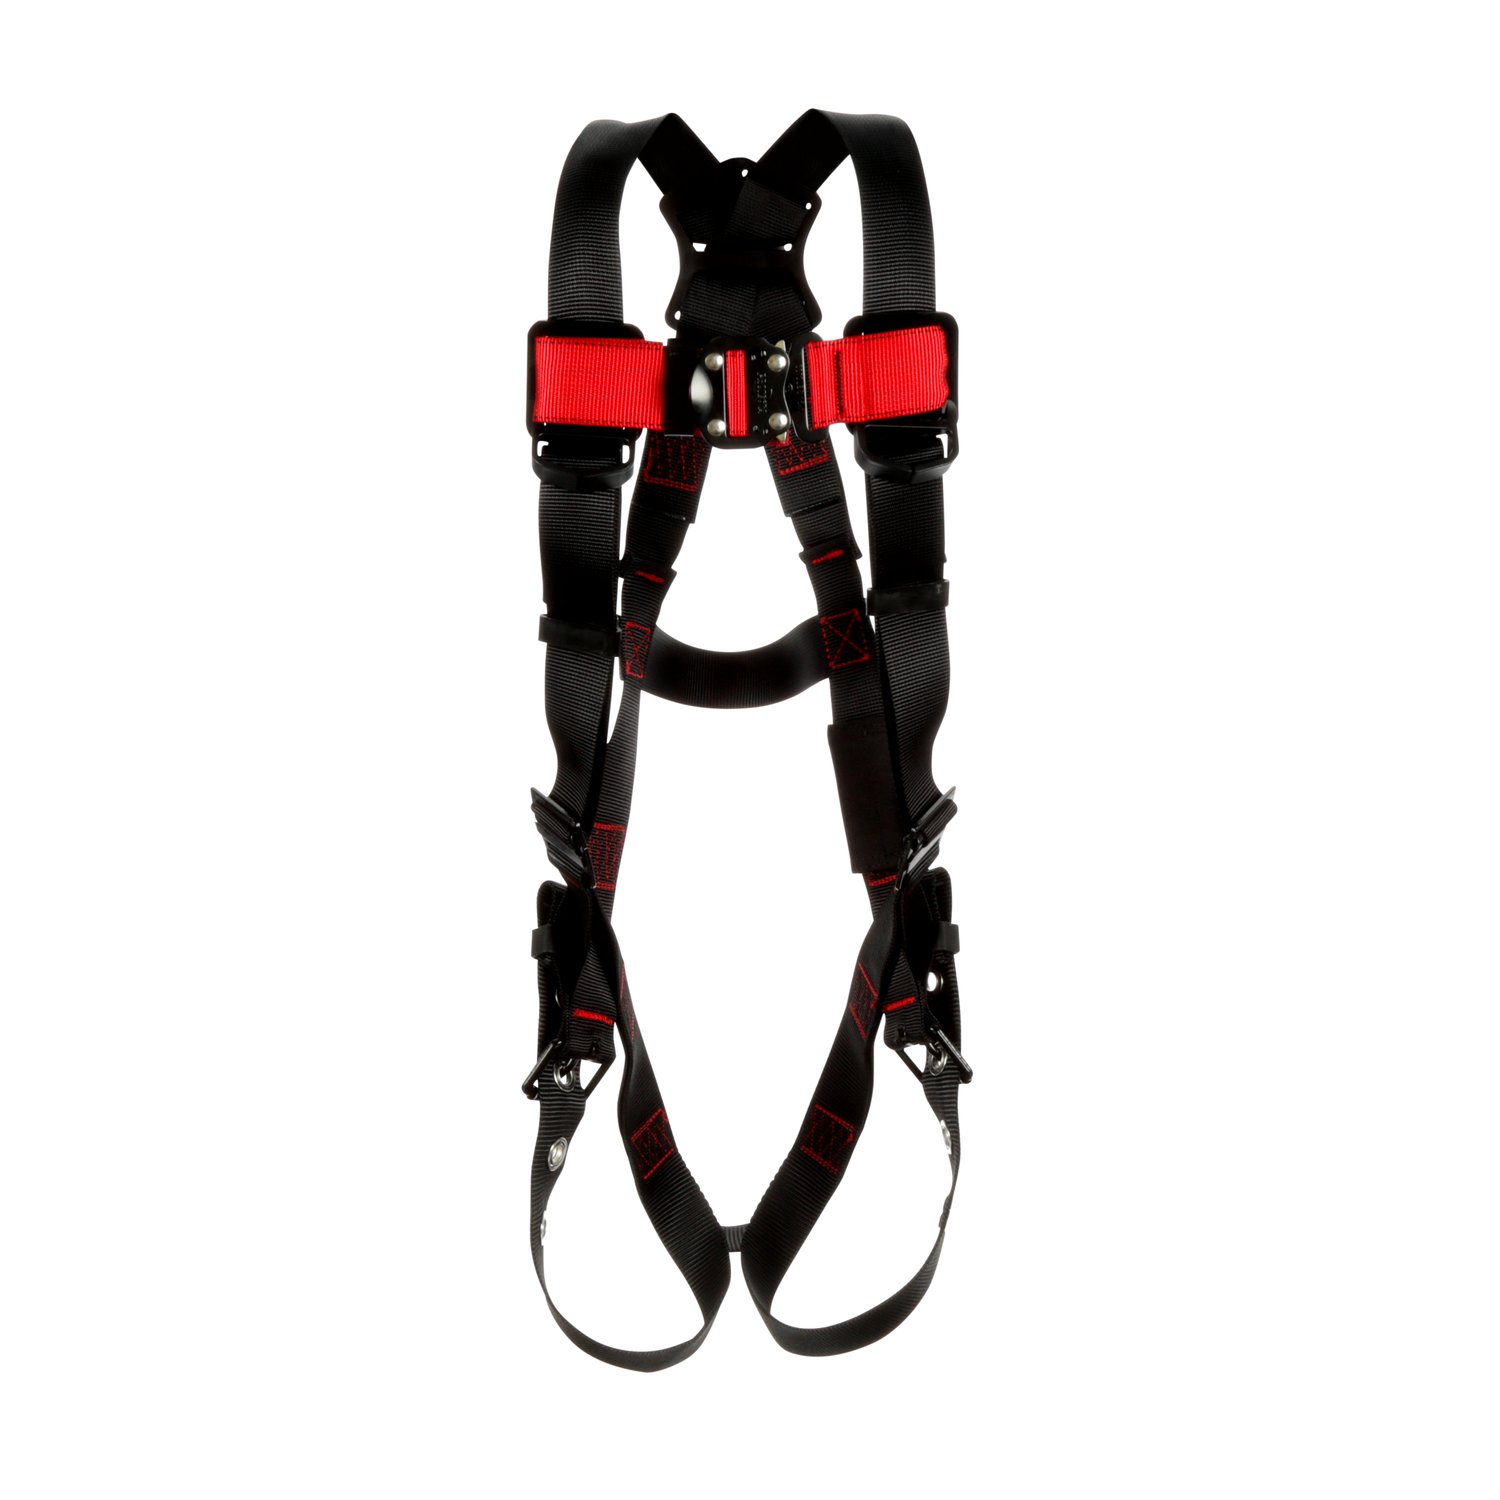 7012816743 - 3M Protecta P200 Vest Safety Harness 1161503, X-Large